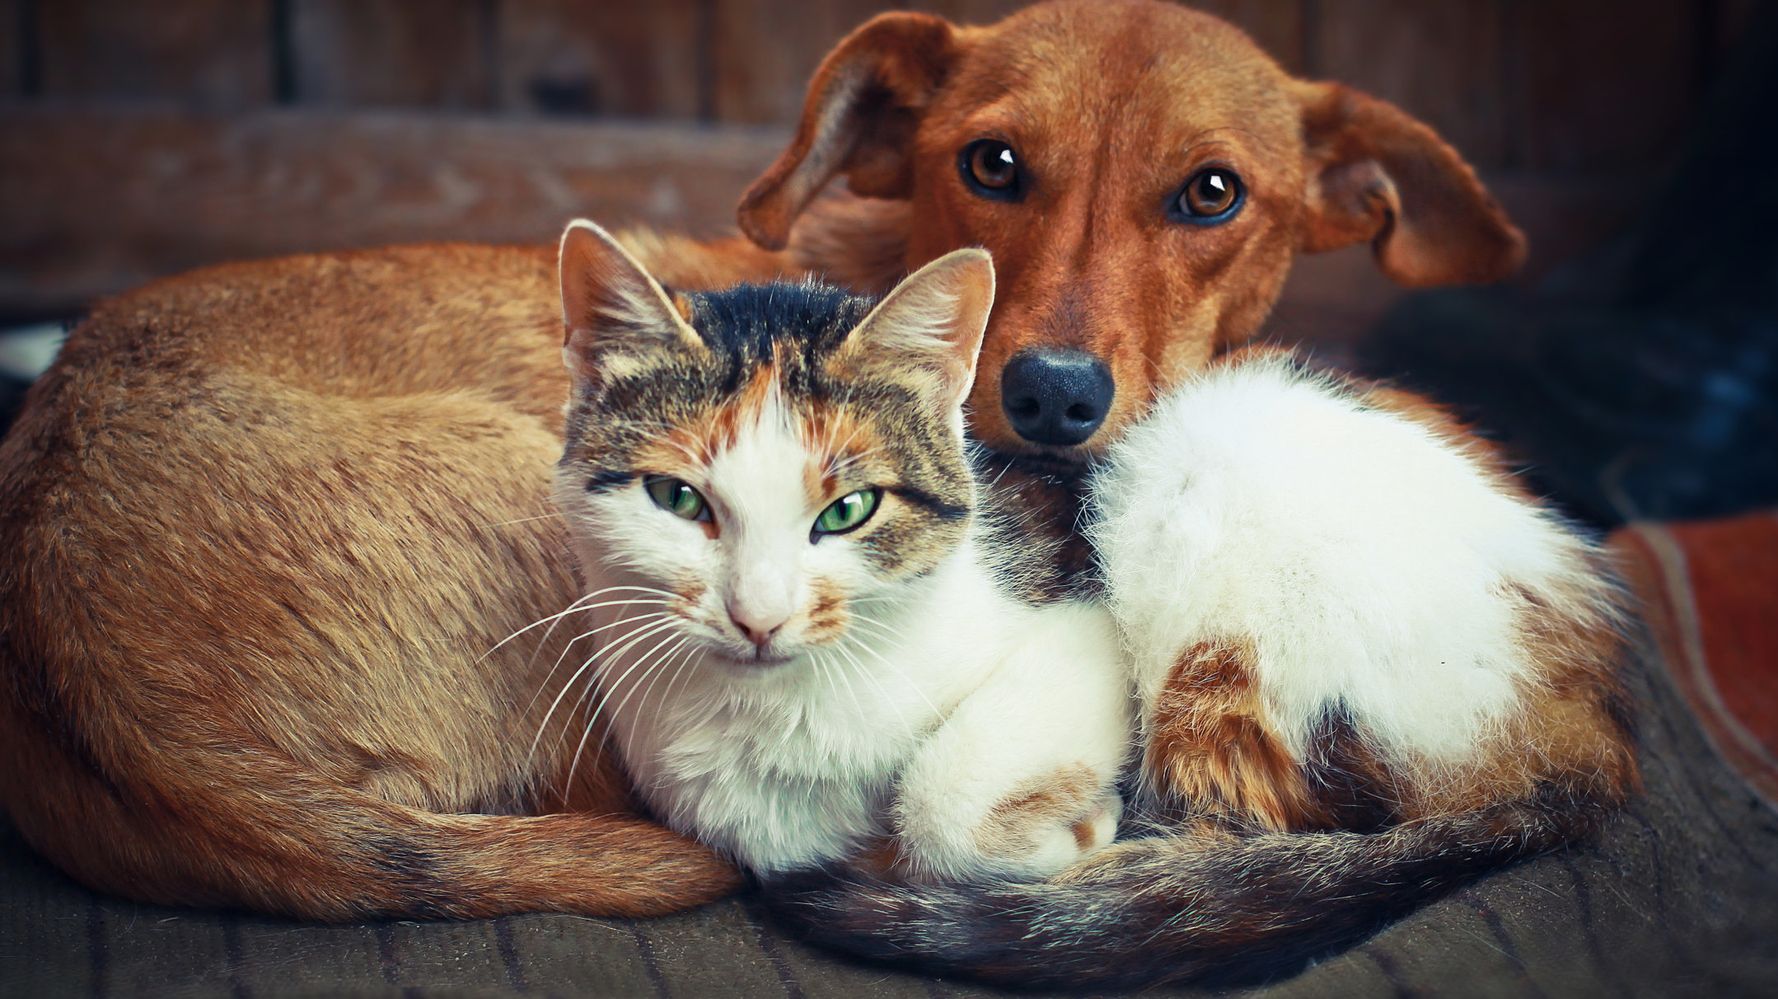 Do dogs or cats love their owners more? Study says one pet's more devoted